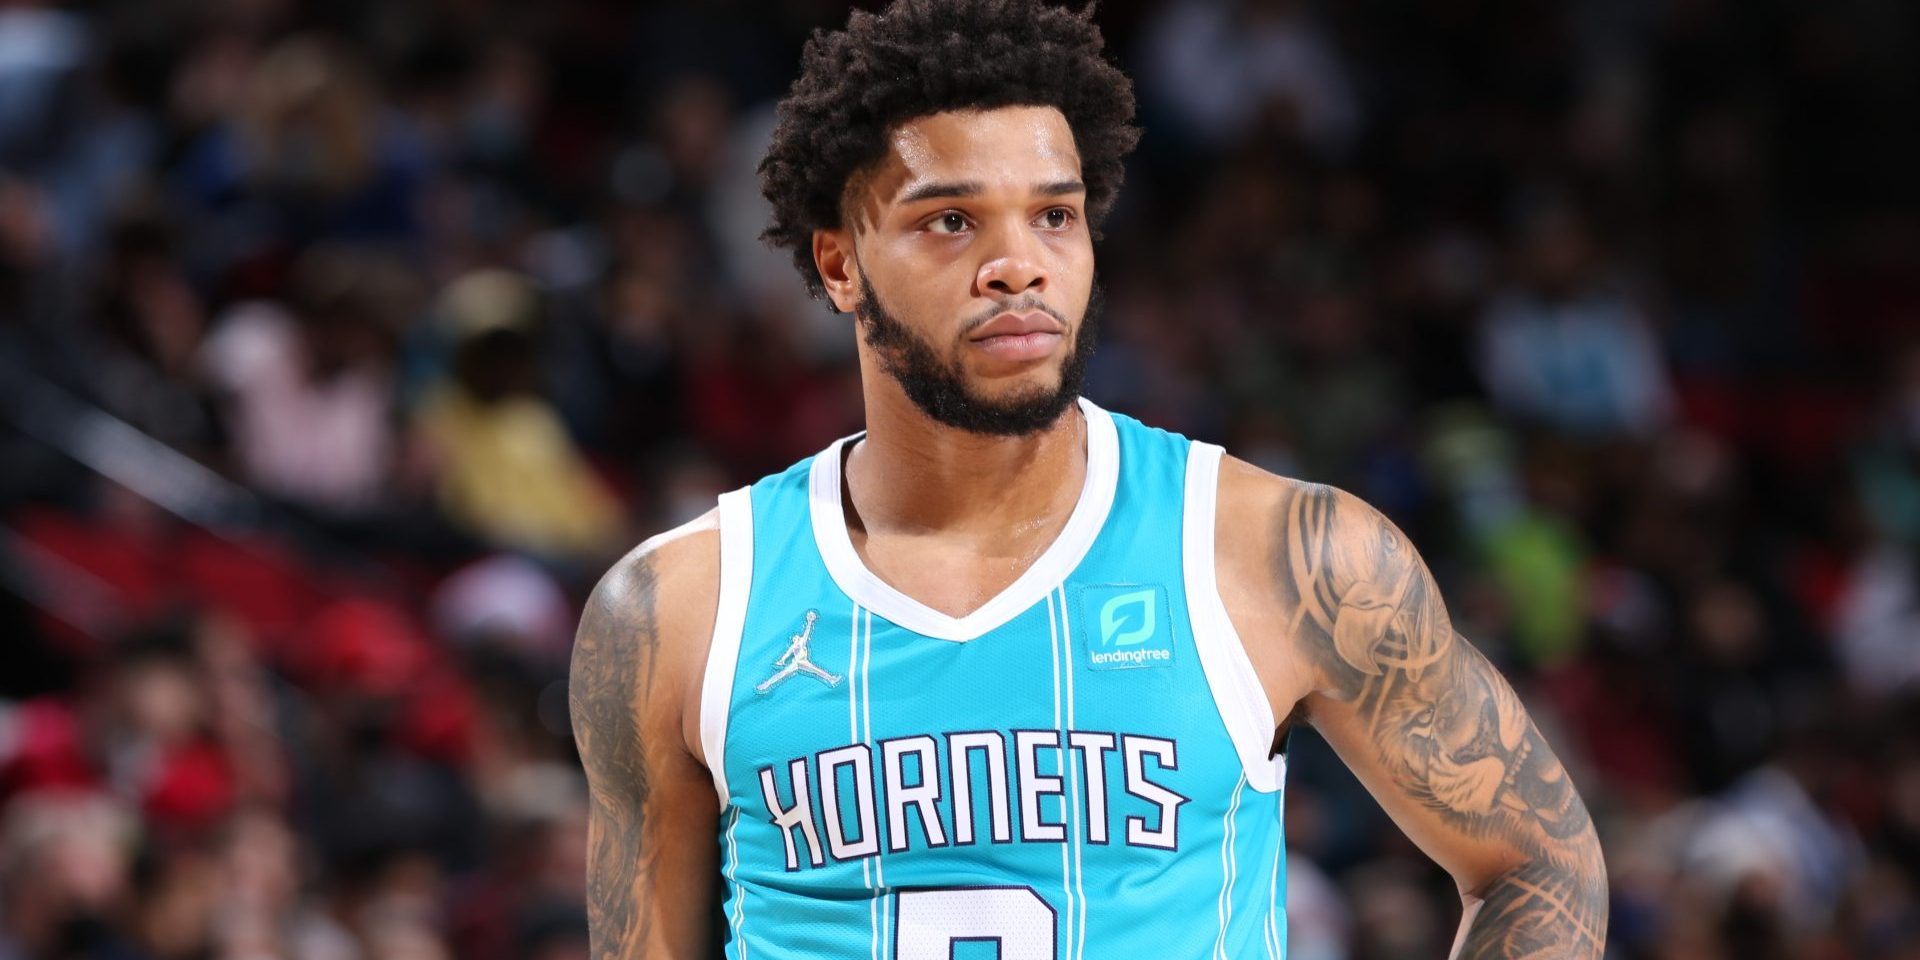 PORTLAND, OR - DECEMBER 17: Miles Bridges #0 of the Charlotte Hornets looks on during the game against the Portland Trail Blazers on December 17, 2021 at the Moda Center Arena in Portland, Oregon. NOTE TO USER: User expressly acknowledges and agrees that, by downloading and or using this photograph, user is consenting to the terms and conditions of the Getty Images License Agreement. Mandatory Copyright Notice: Copyright 2021 NBAE (Photo by Sam Forencich/NBAE via Getty Images)